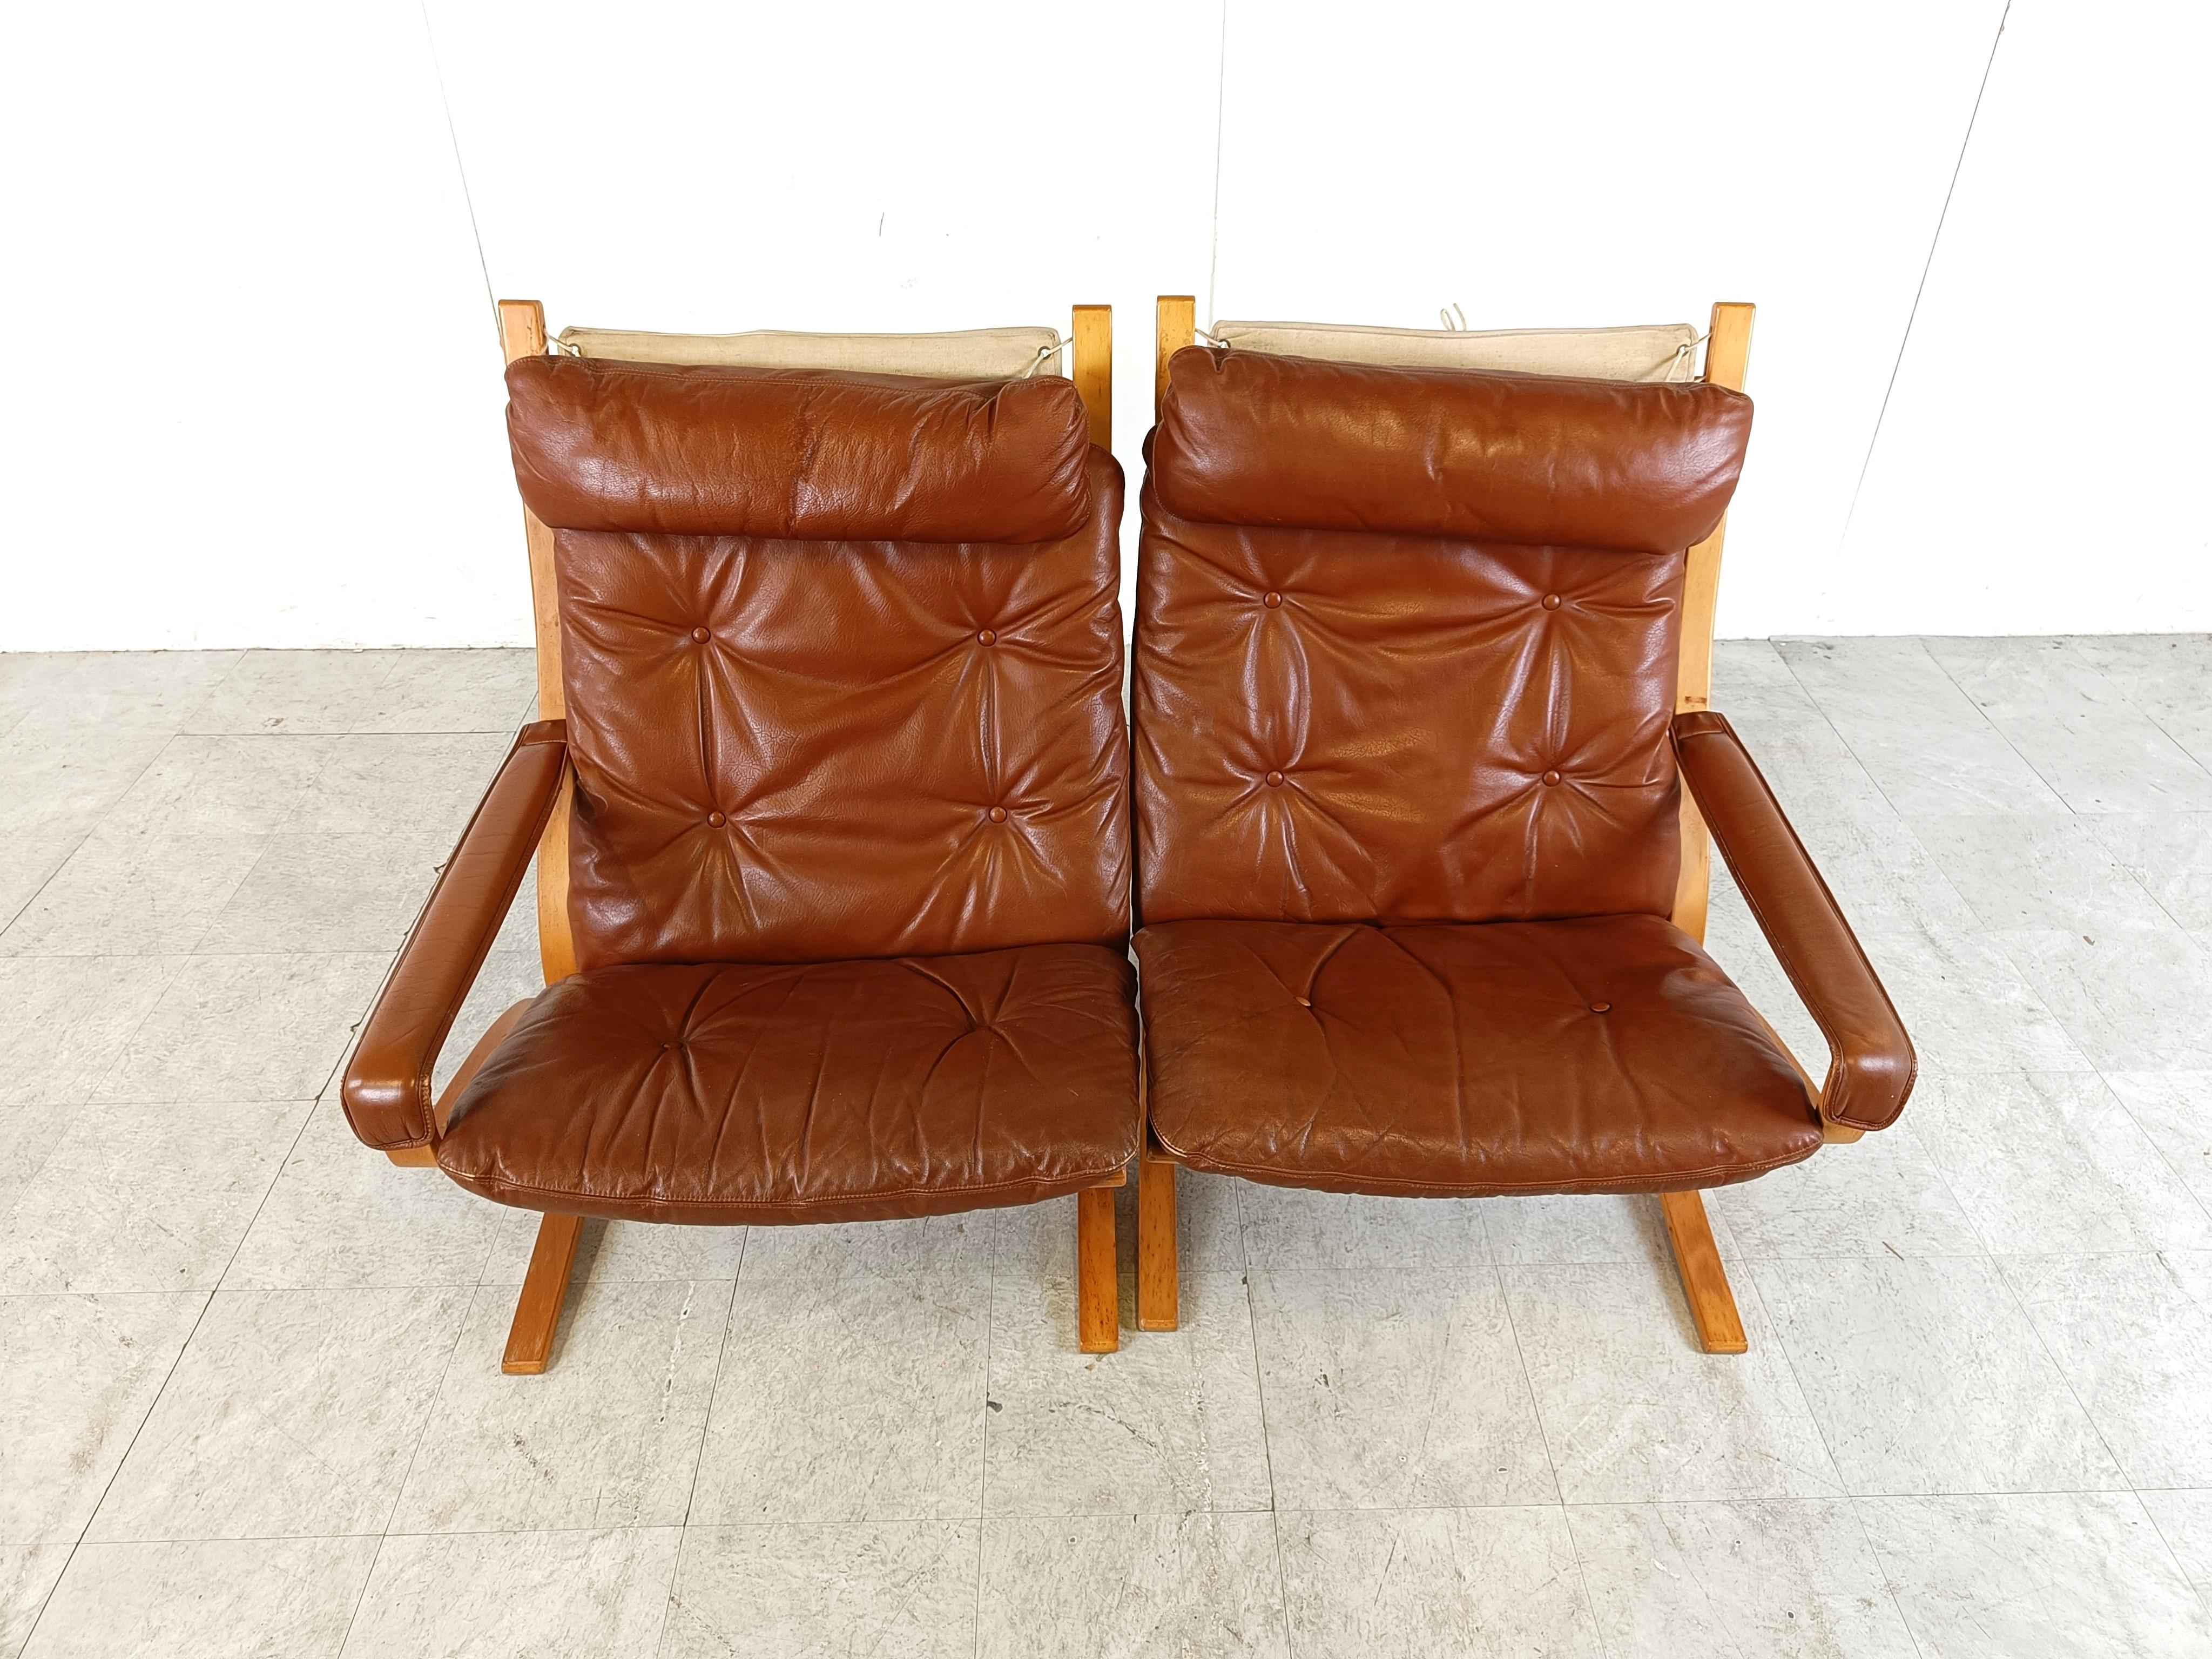 Rare two seater bench designed by Ingmar Relling for Westnofa.

It consists of two armchairs put toghether to create this rare bench. 

Beautiful camel leather with a black wooden frame.

Very good condition

Will be disassembled for